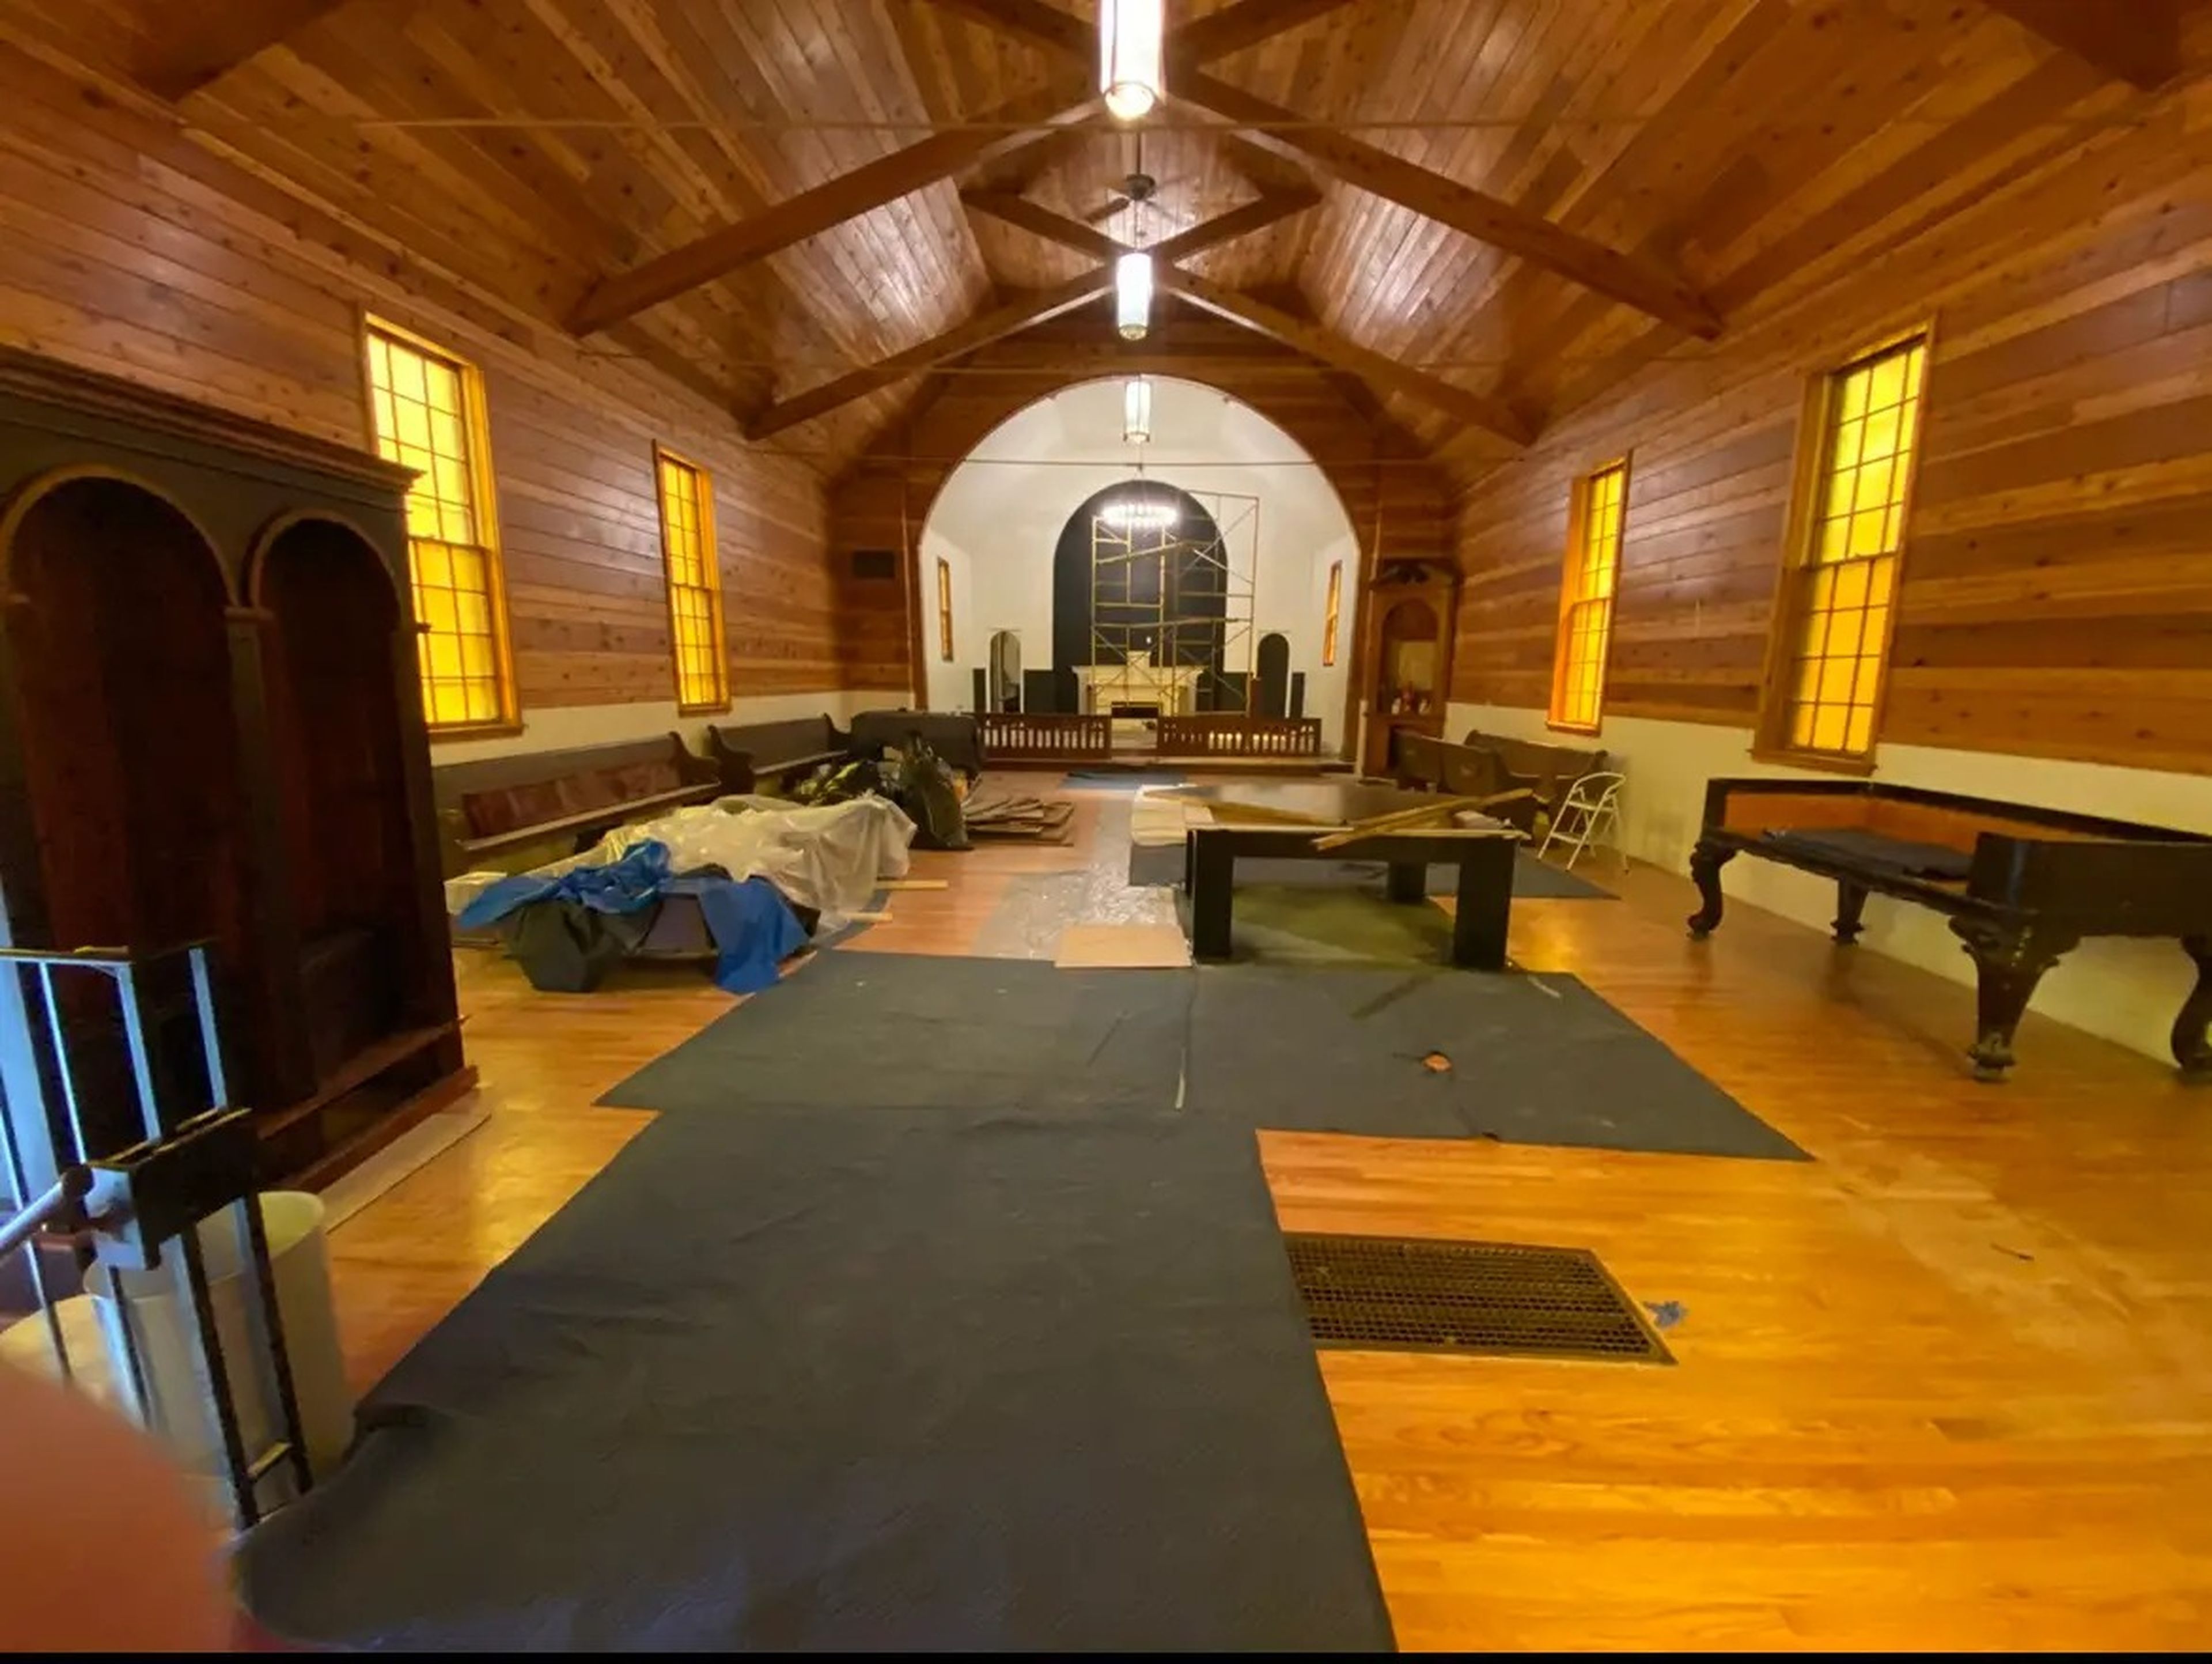 A church nave with wood walls and moving blankets on the floors.